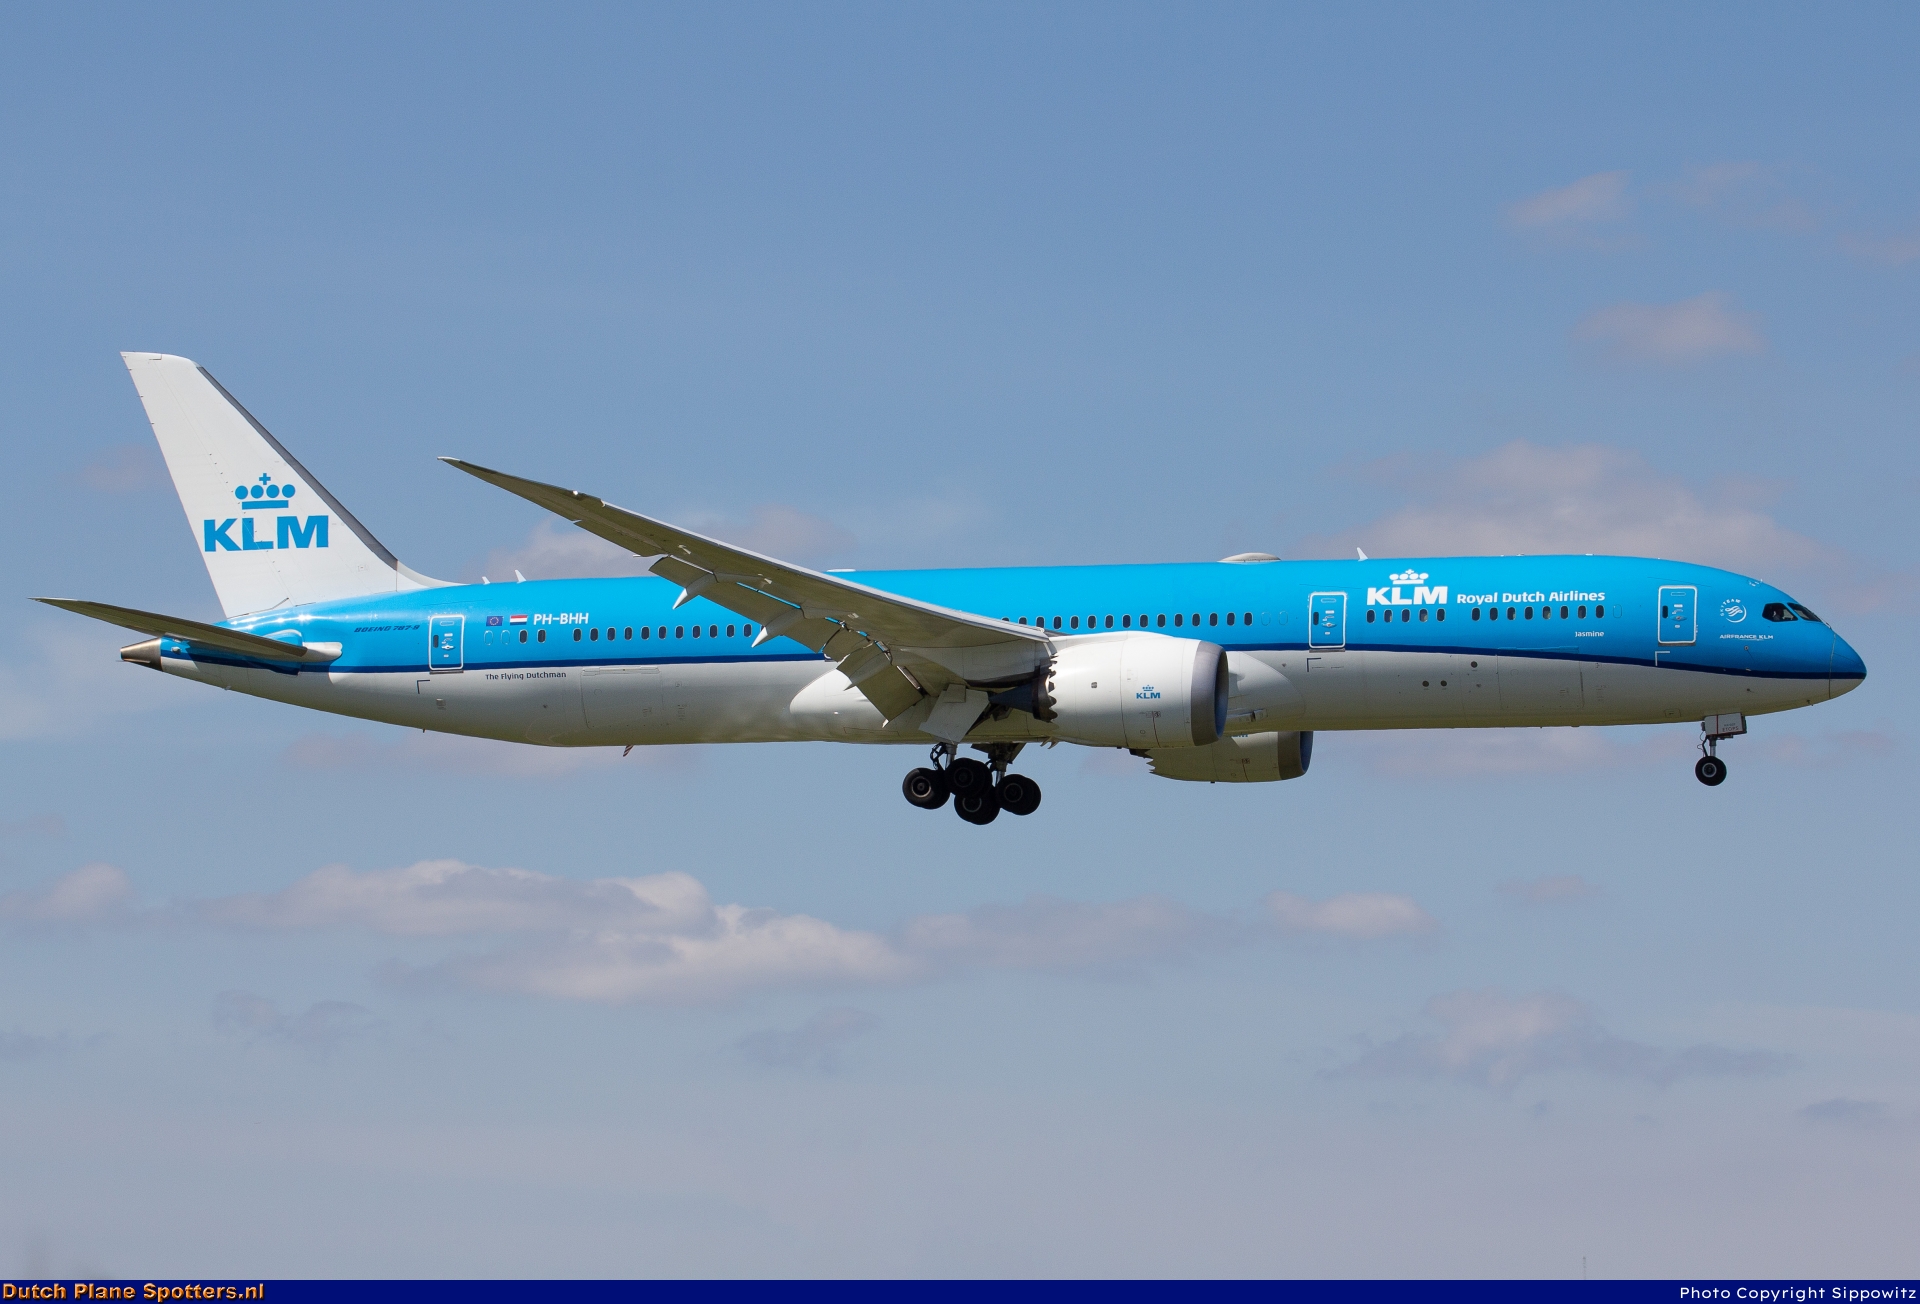 PH-BHH Boeing 787-9 Dreamliner KLM Royal Dutch Airlines by Sippowitz